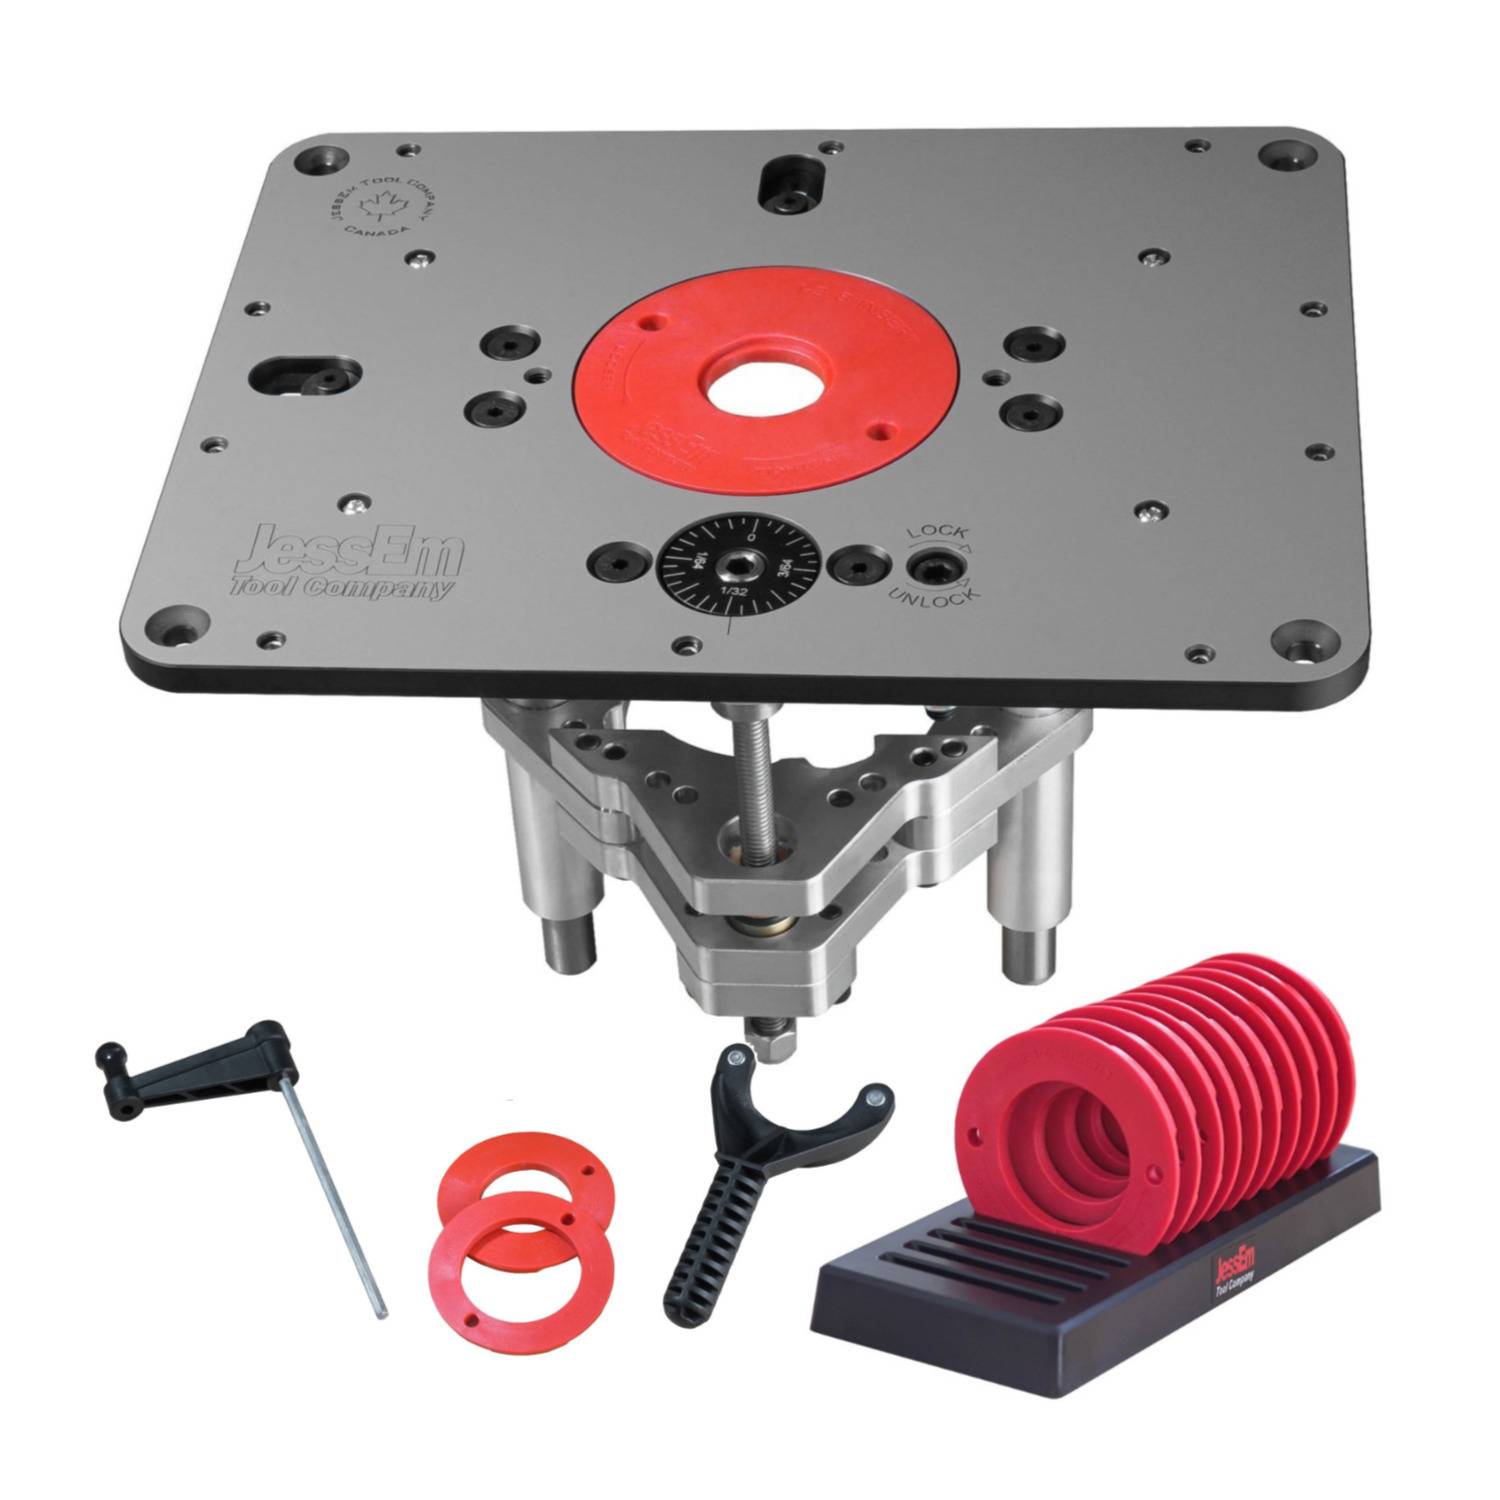 JessEm 02310 Rout-R-Lift II Router Lift with 02030 10-Piece Insert Ring Kit with Caddy